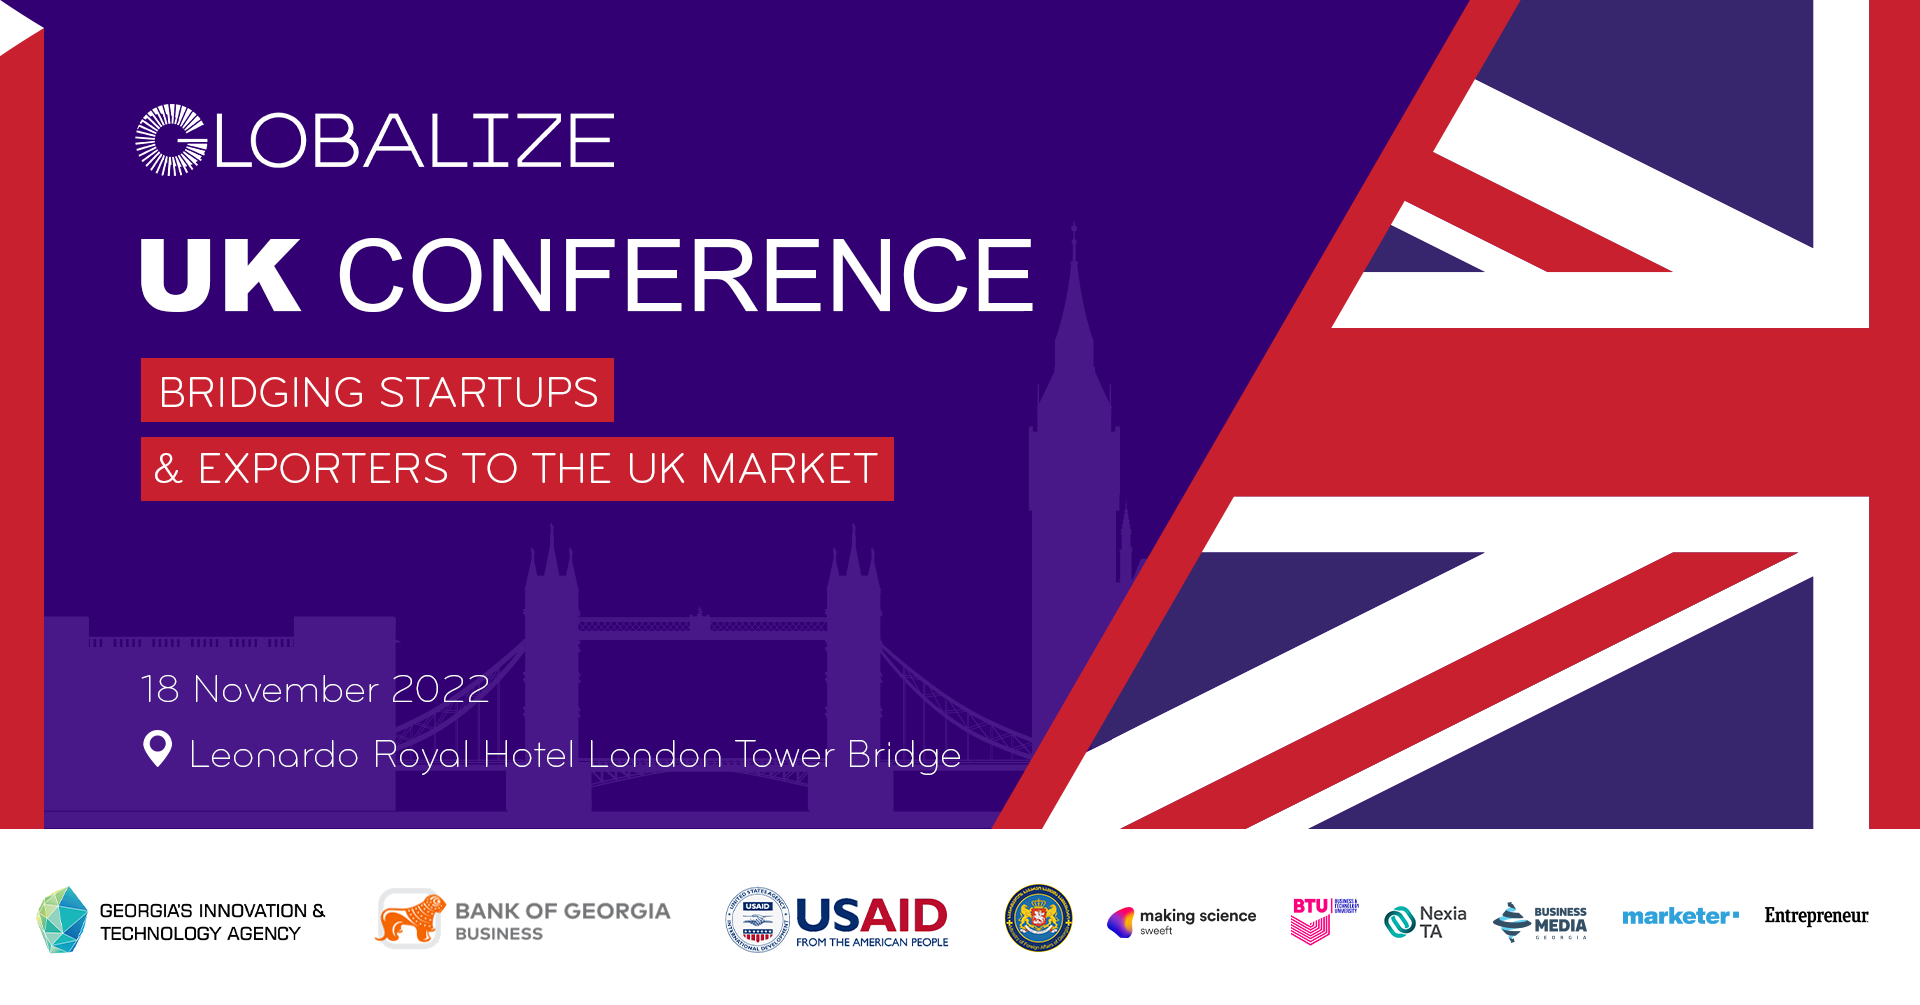 GLOBALIZE UK Conference